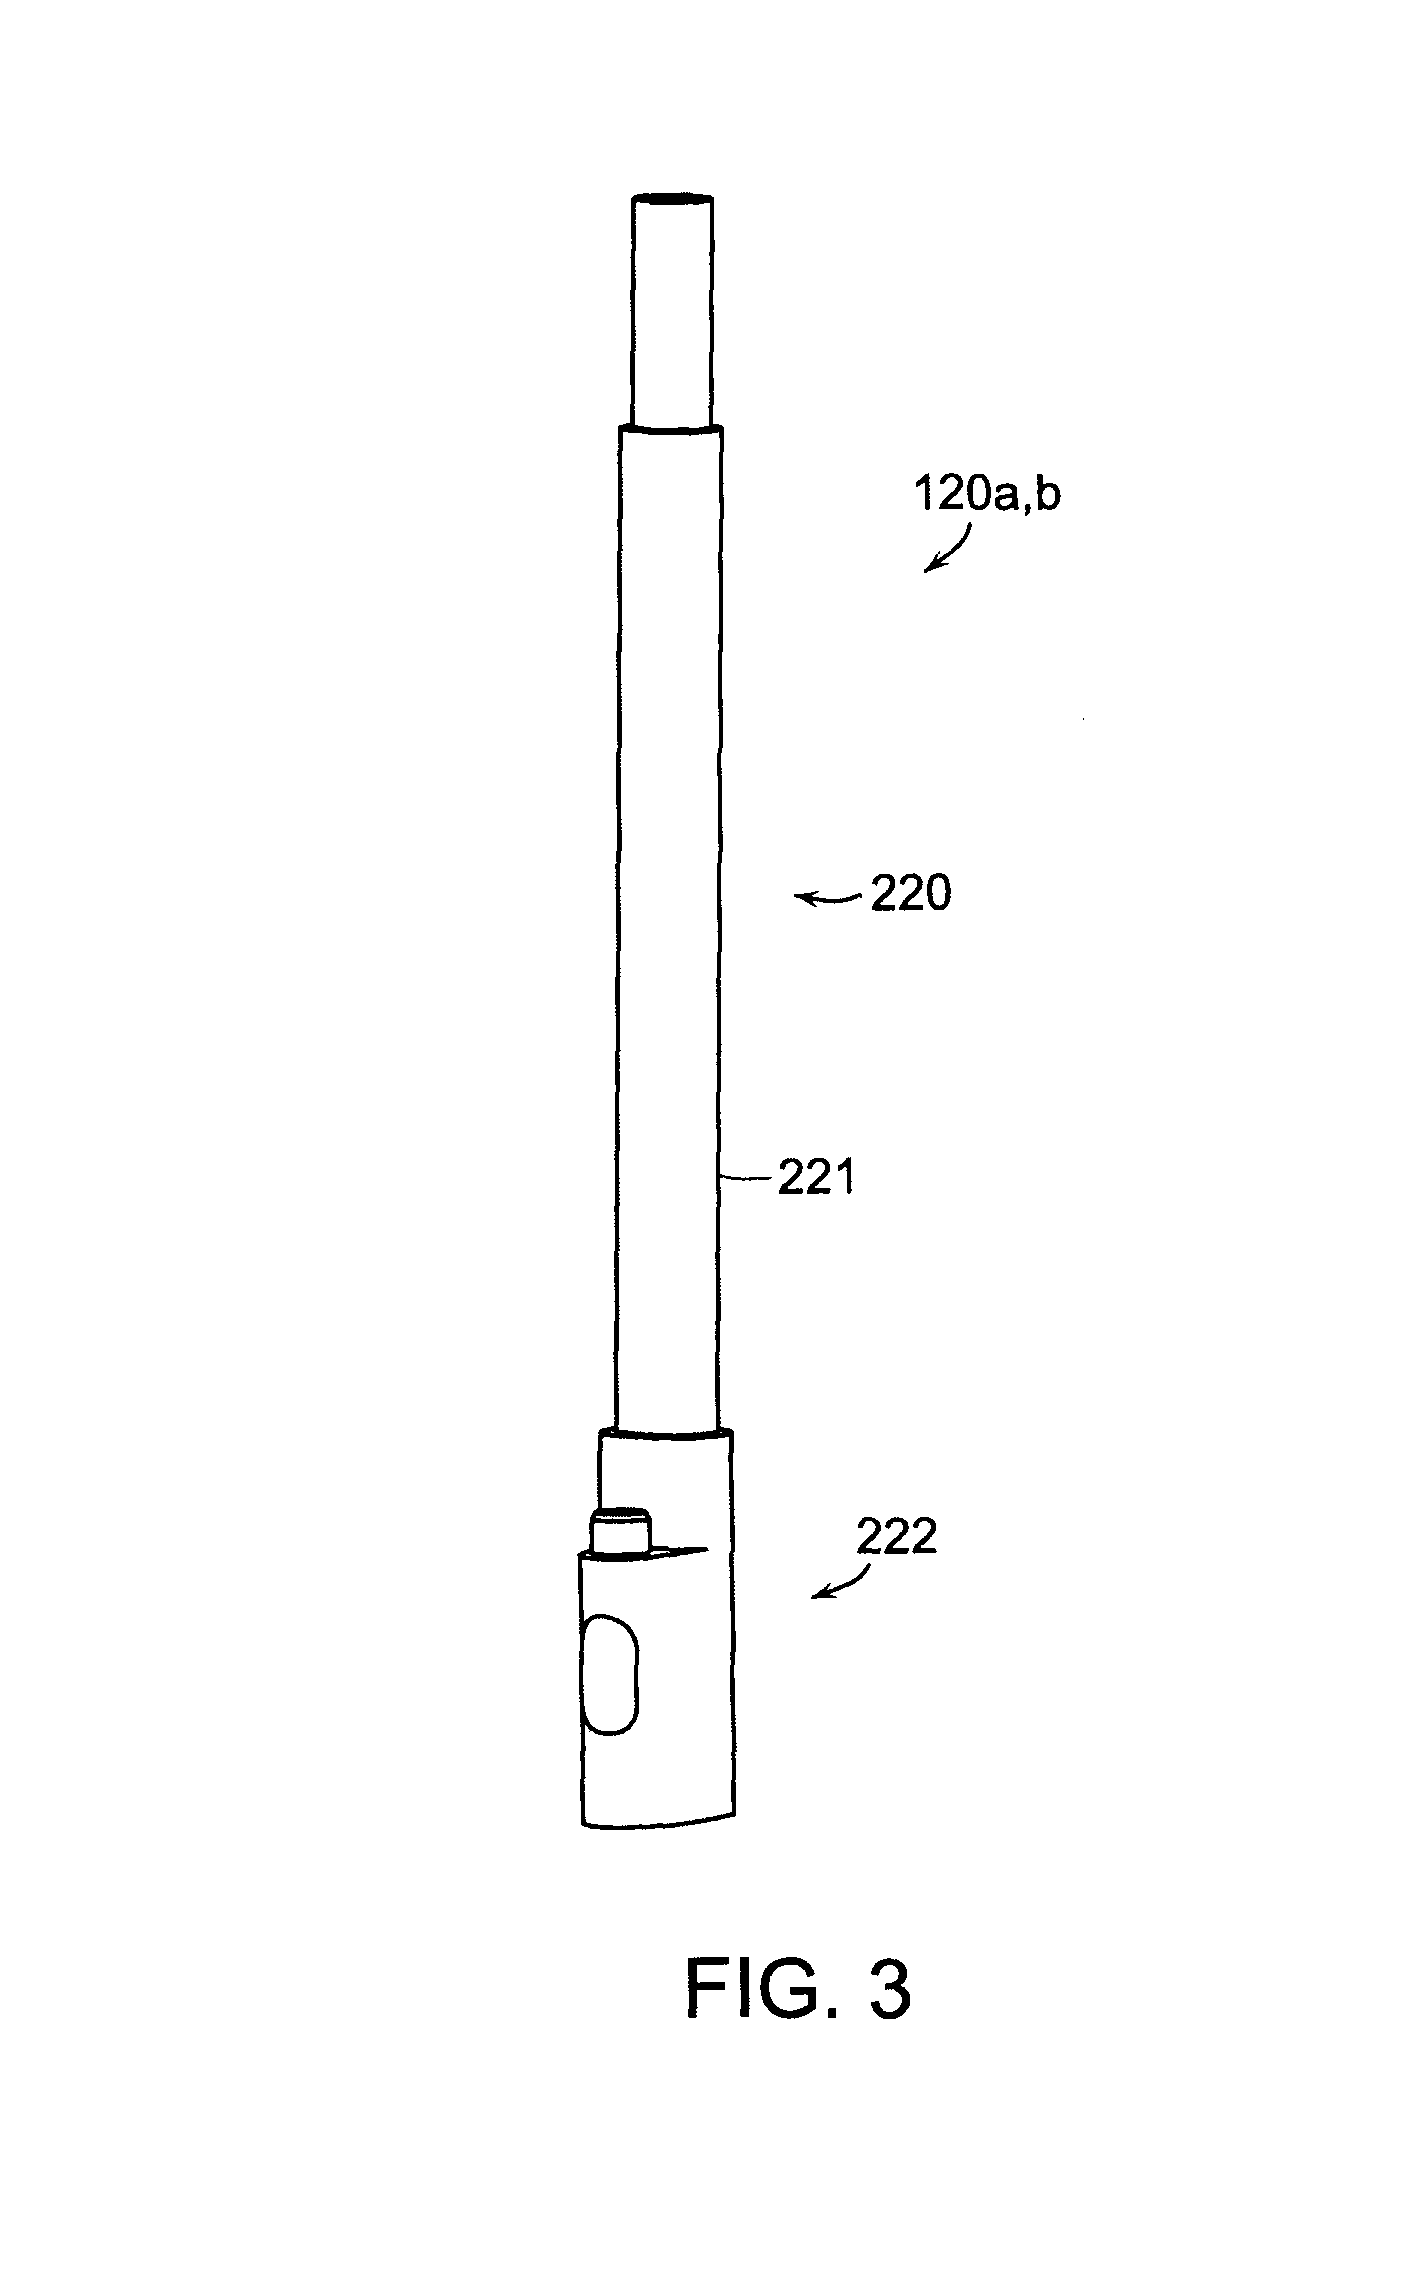 Vertebral body reduction instrument and methods related thereto